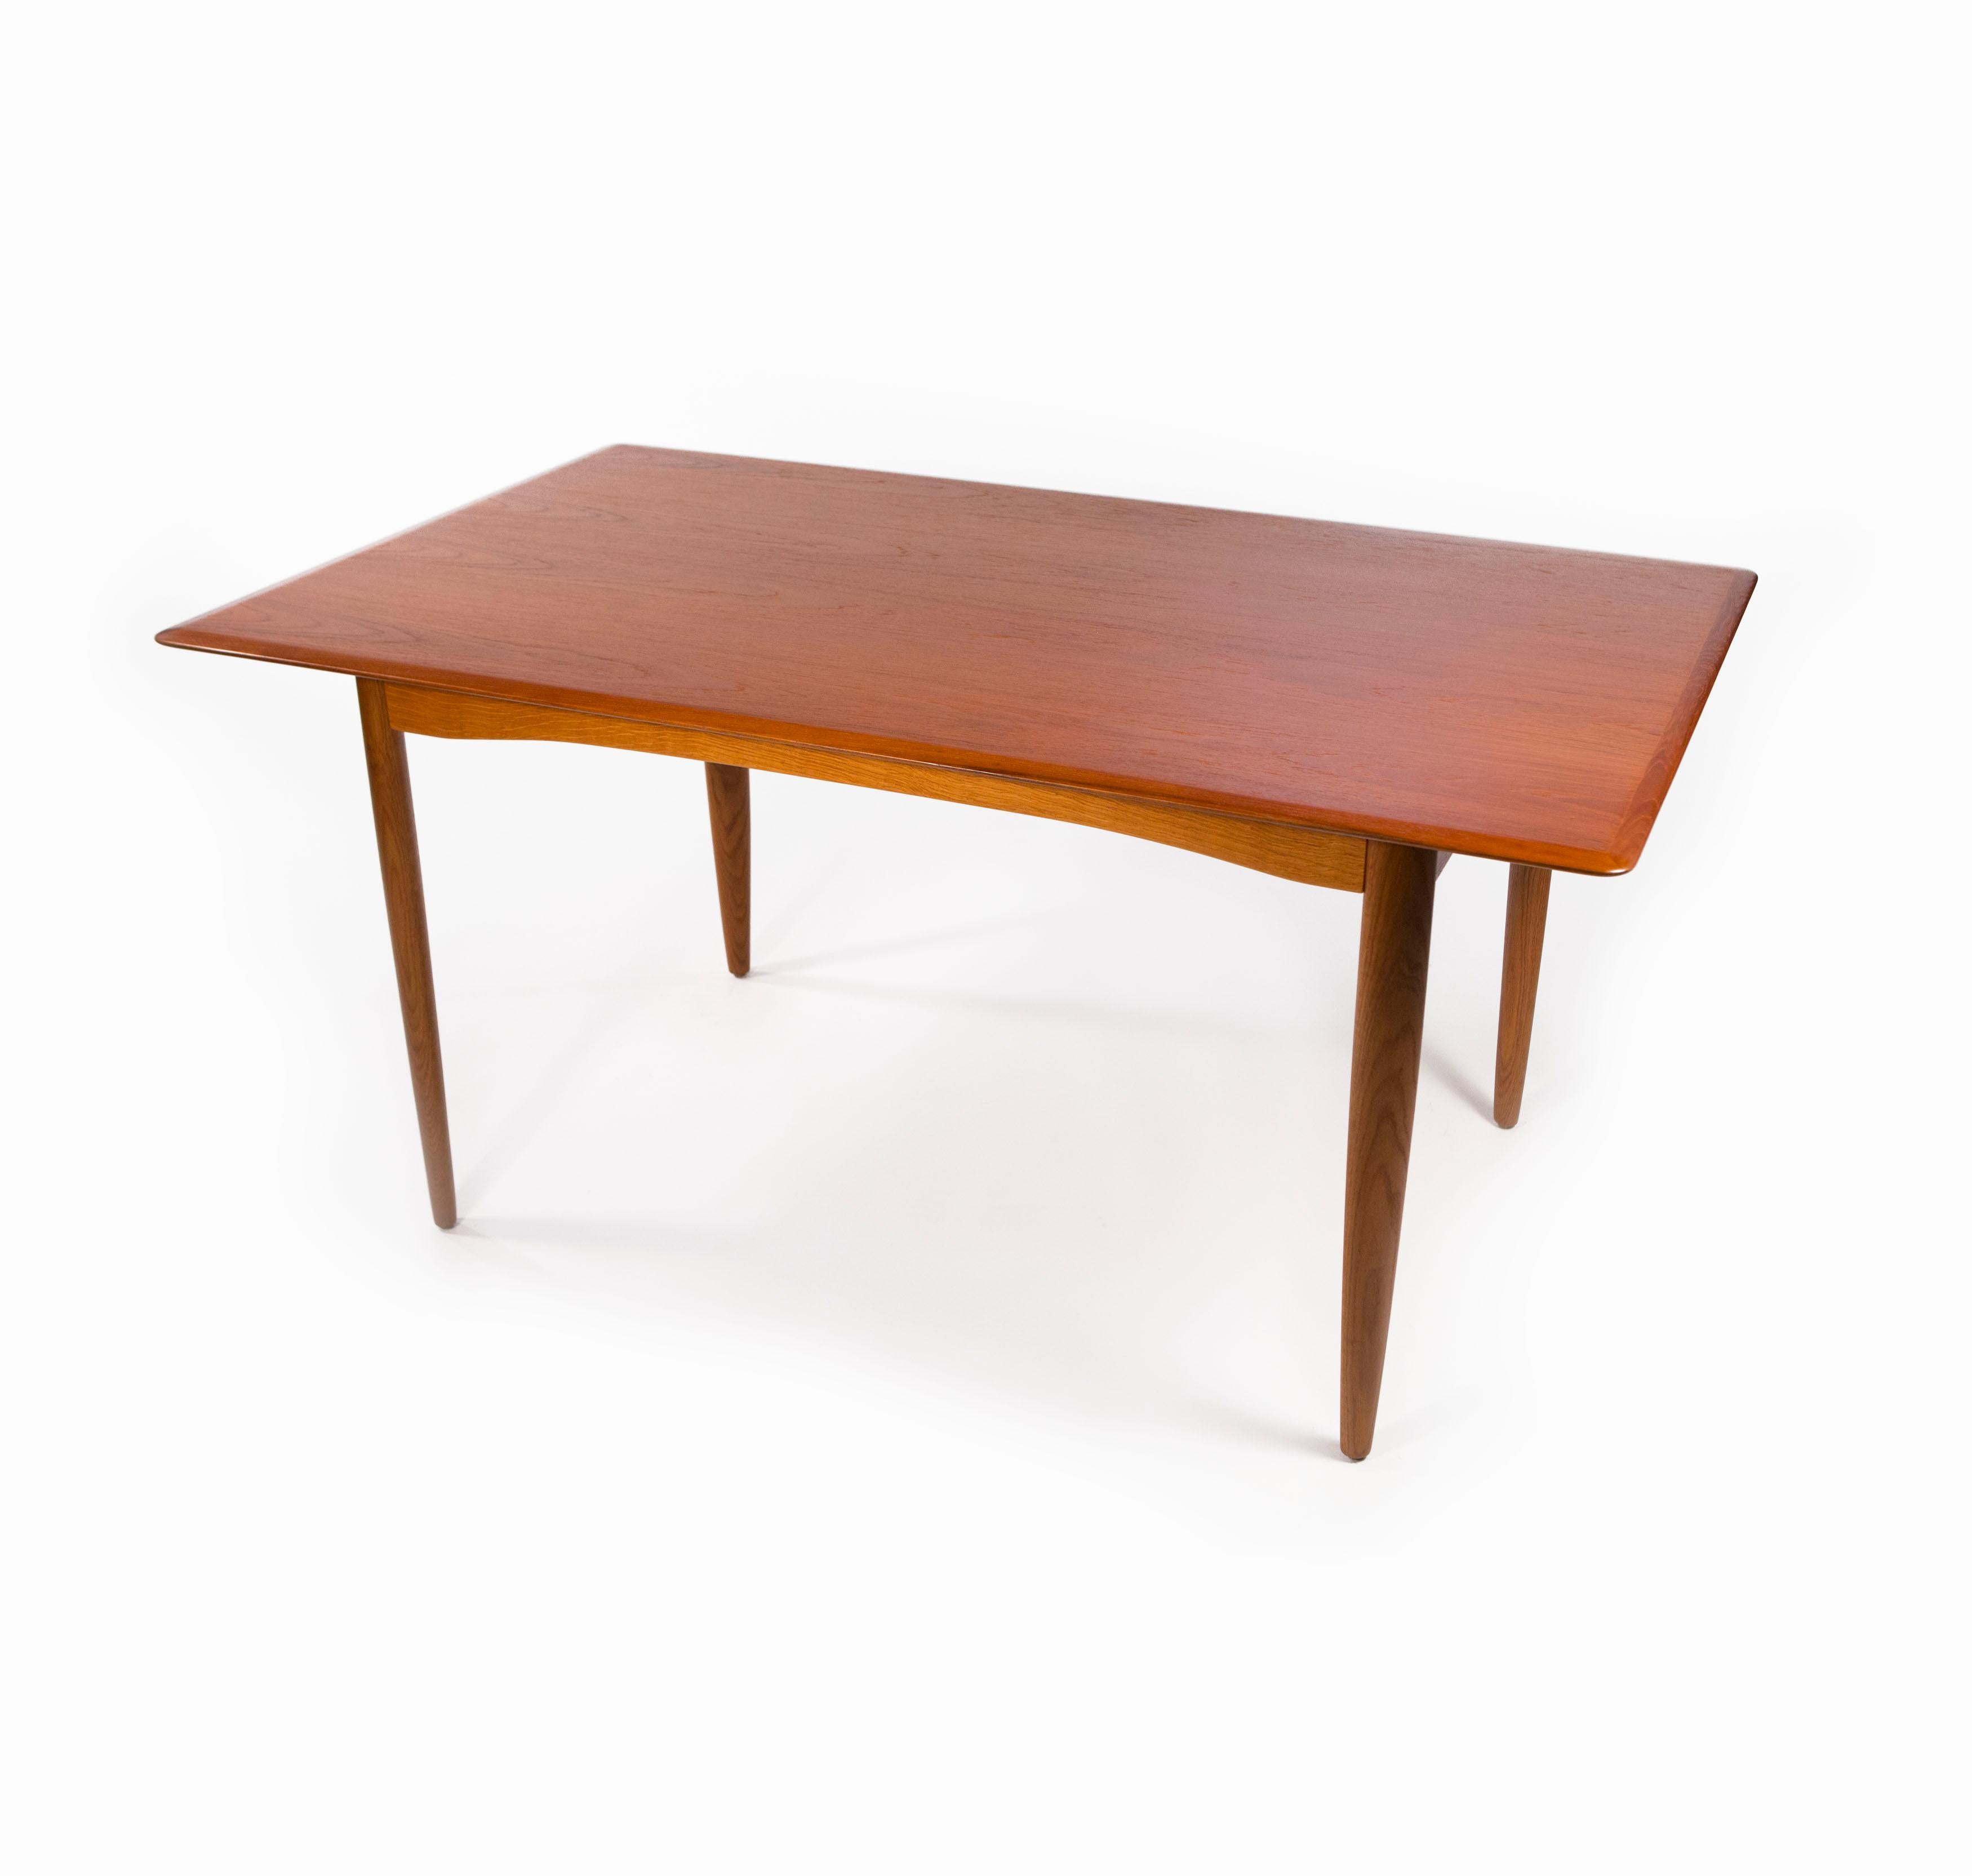 Ib Kofod-Larsen extending dining table no. 403 by Slagelse Møbelvæ, Denmark, 1950s

An exceptional midcentury Danish modern teak extension dining table designed by Ib Kofod-Larsen. The table features gorgeous teak wood grain with delicately